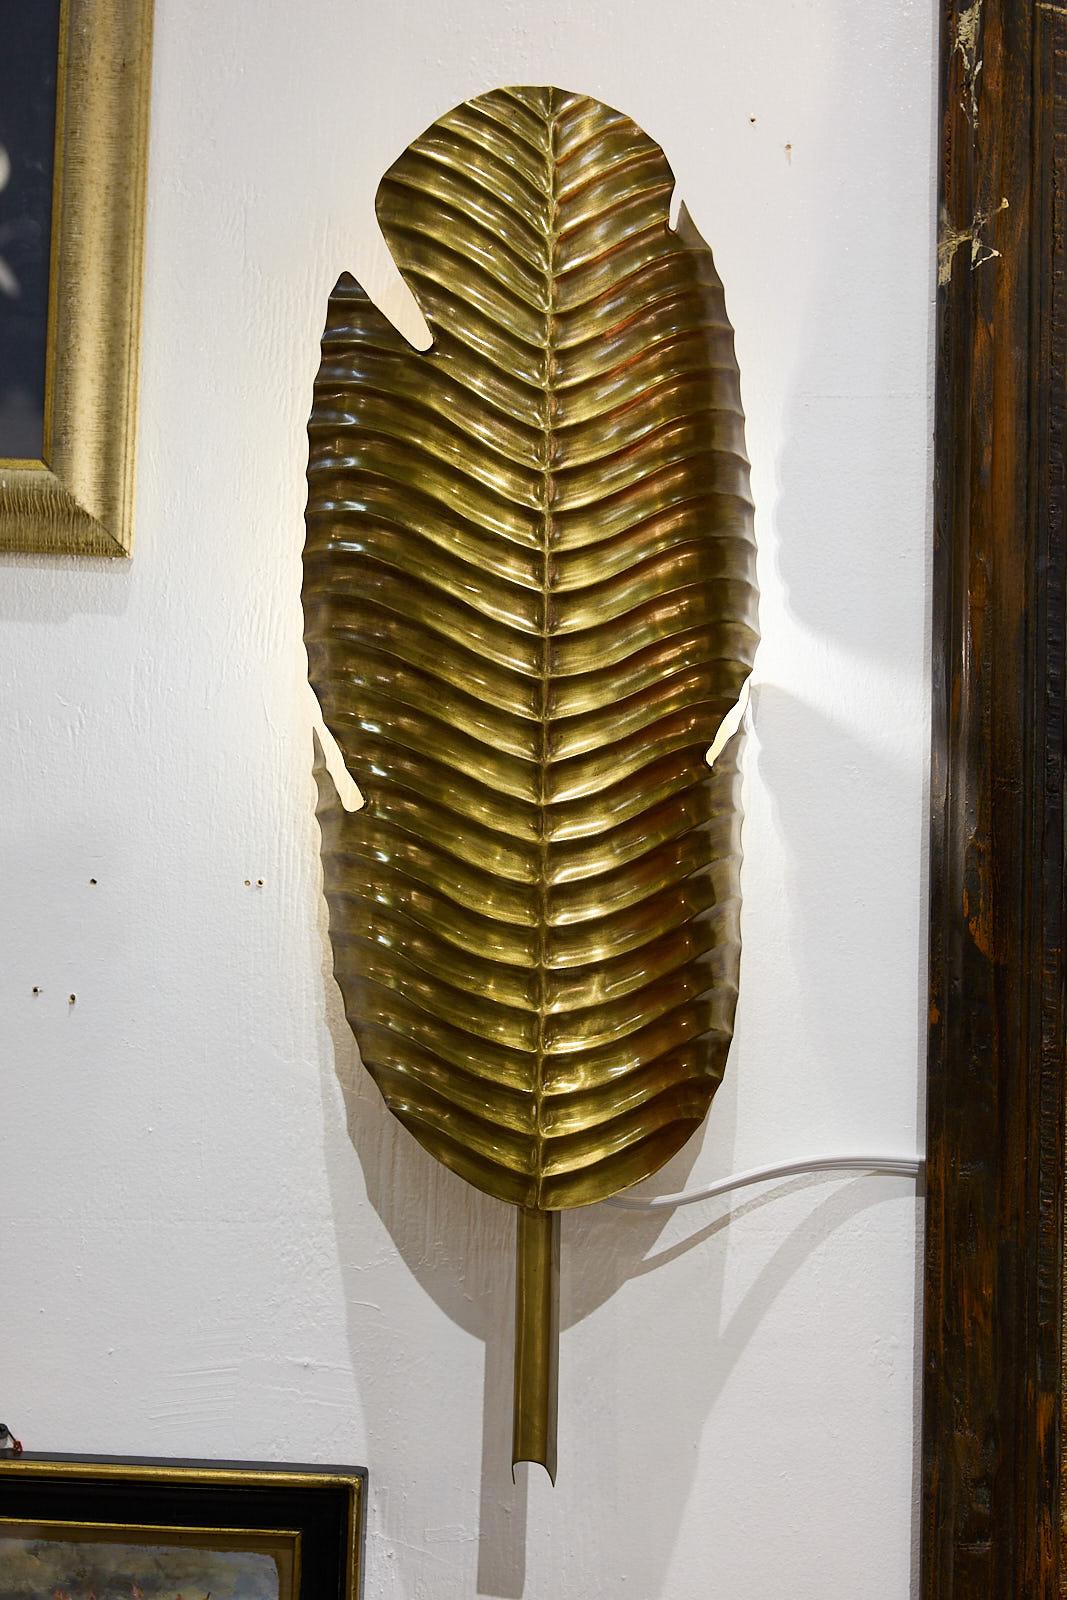 Wonderful pair of large Tropical Leaf Wall Sconces by Currey and Company made of brass and cast in the shape of palm leaves with ridged venation patterns and short stems. A circular wall mount affixes the piece into place, while a single bulb rests